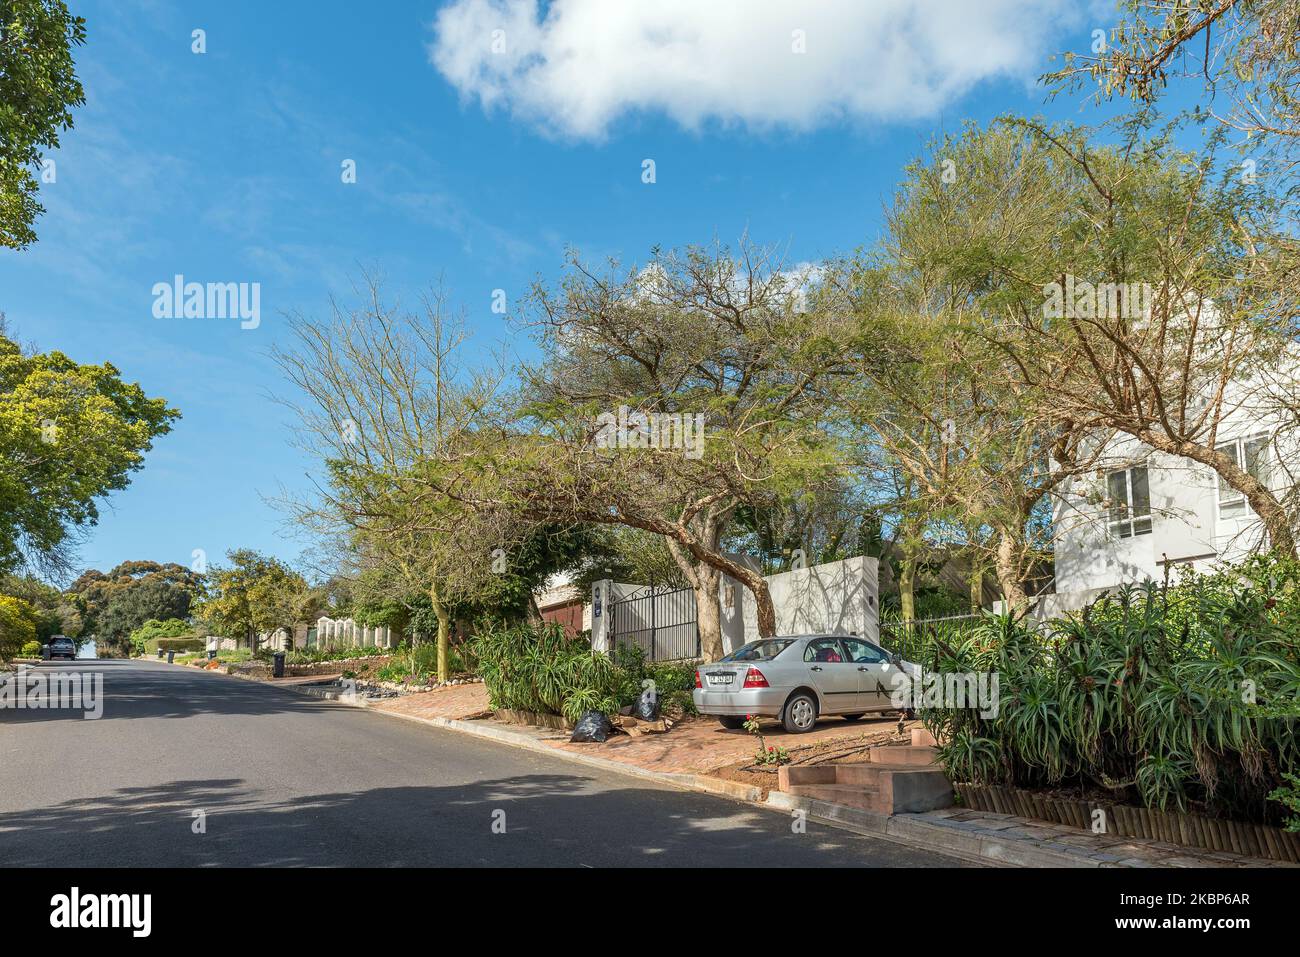 DURBANVILLE, SOUTH AFRICA - SEP 12, 2022: A street scene, with houses and vehicles, in Durbanville in the Cape Town metroplitan area Stock Photo